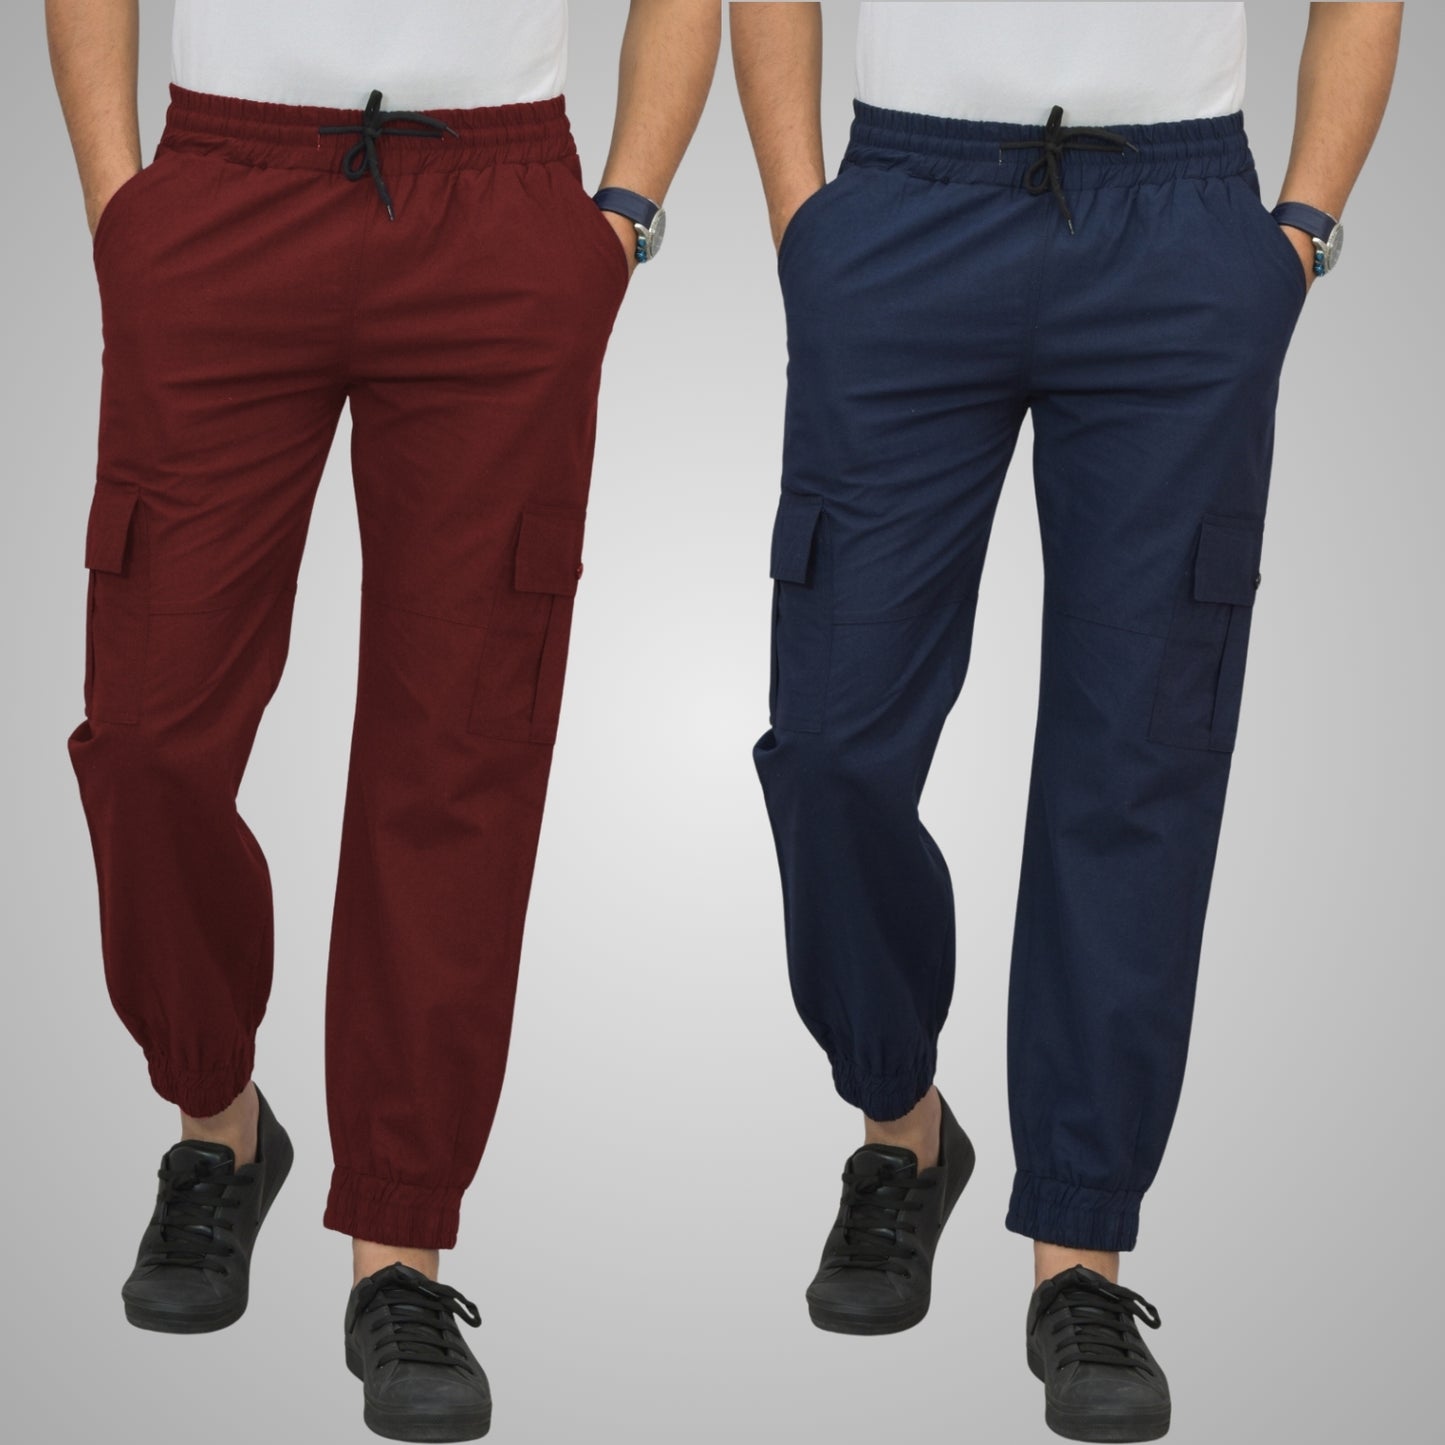 Pack Of 2 Mens Wine And Navy Blue Airy Linen Summer Cool Cotton Comfort Joggers